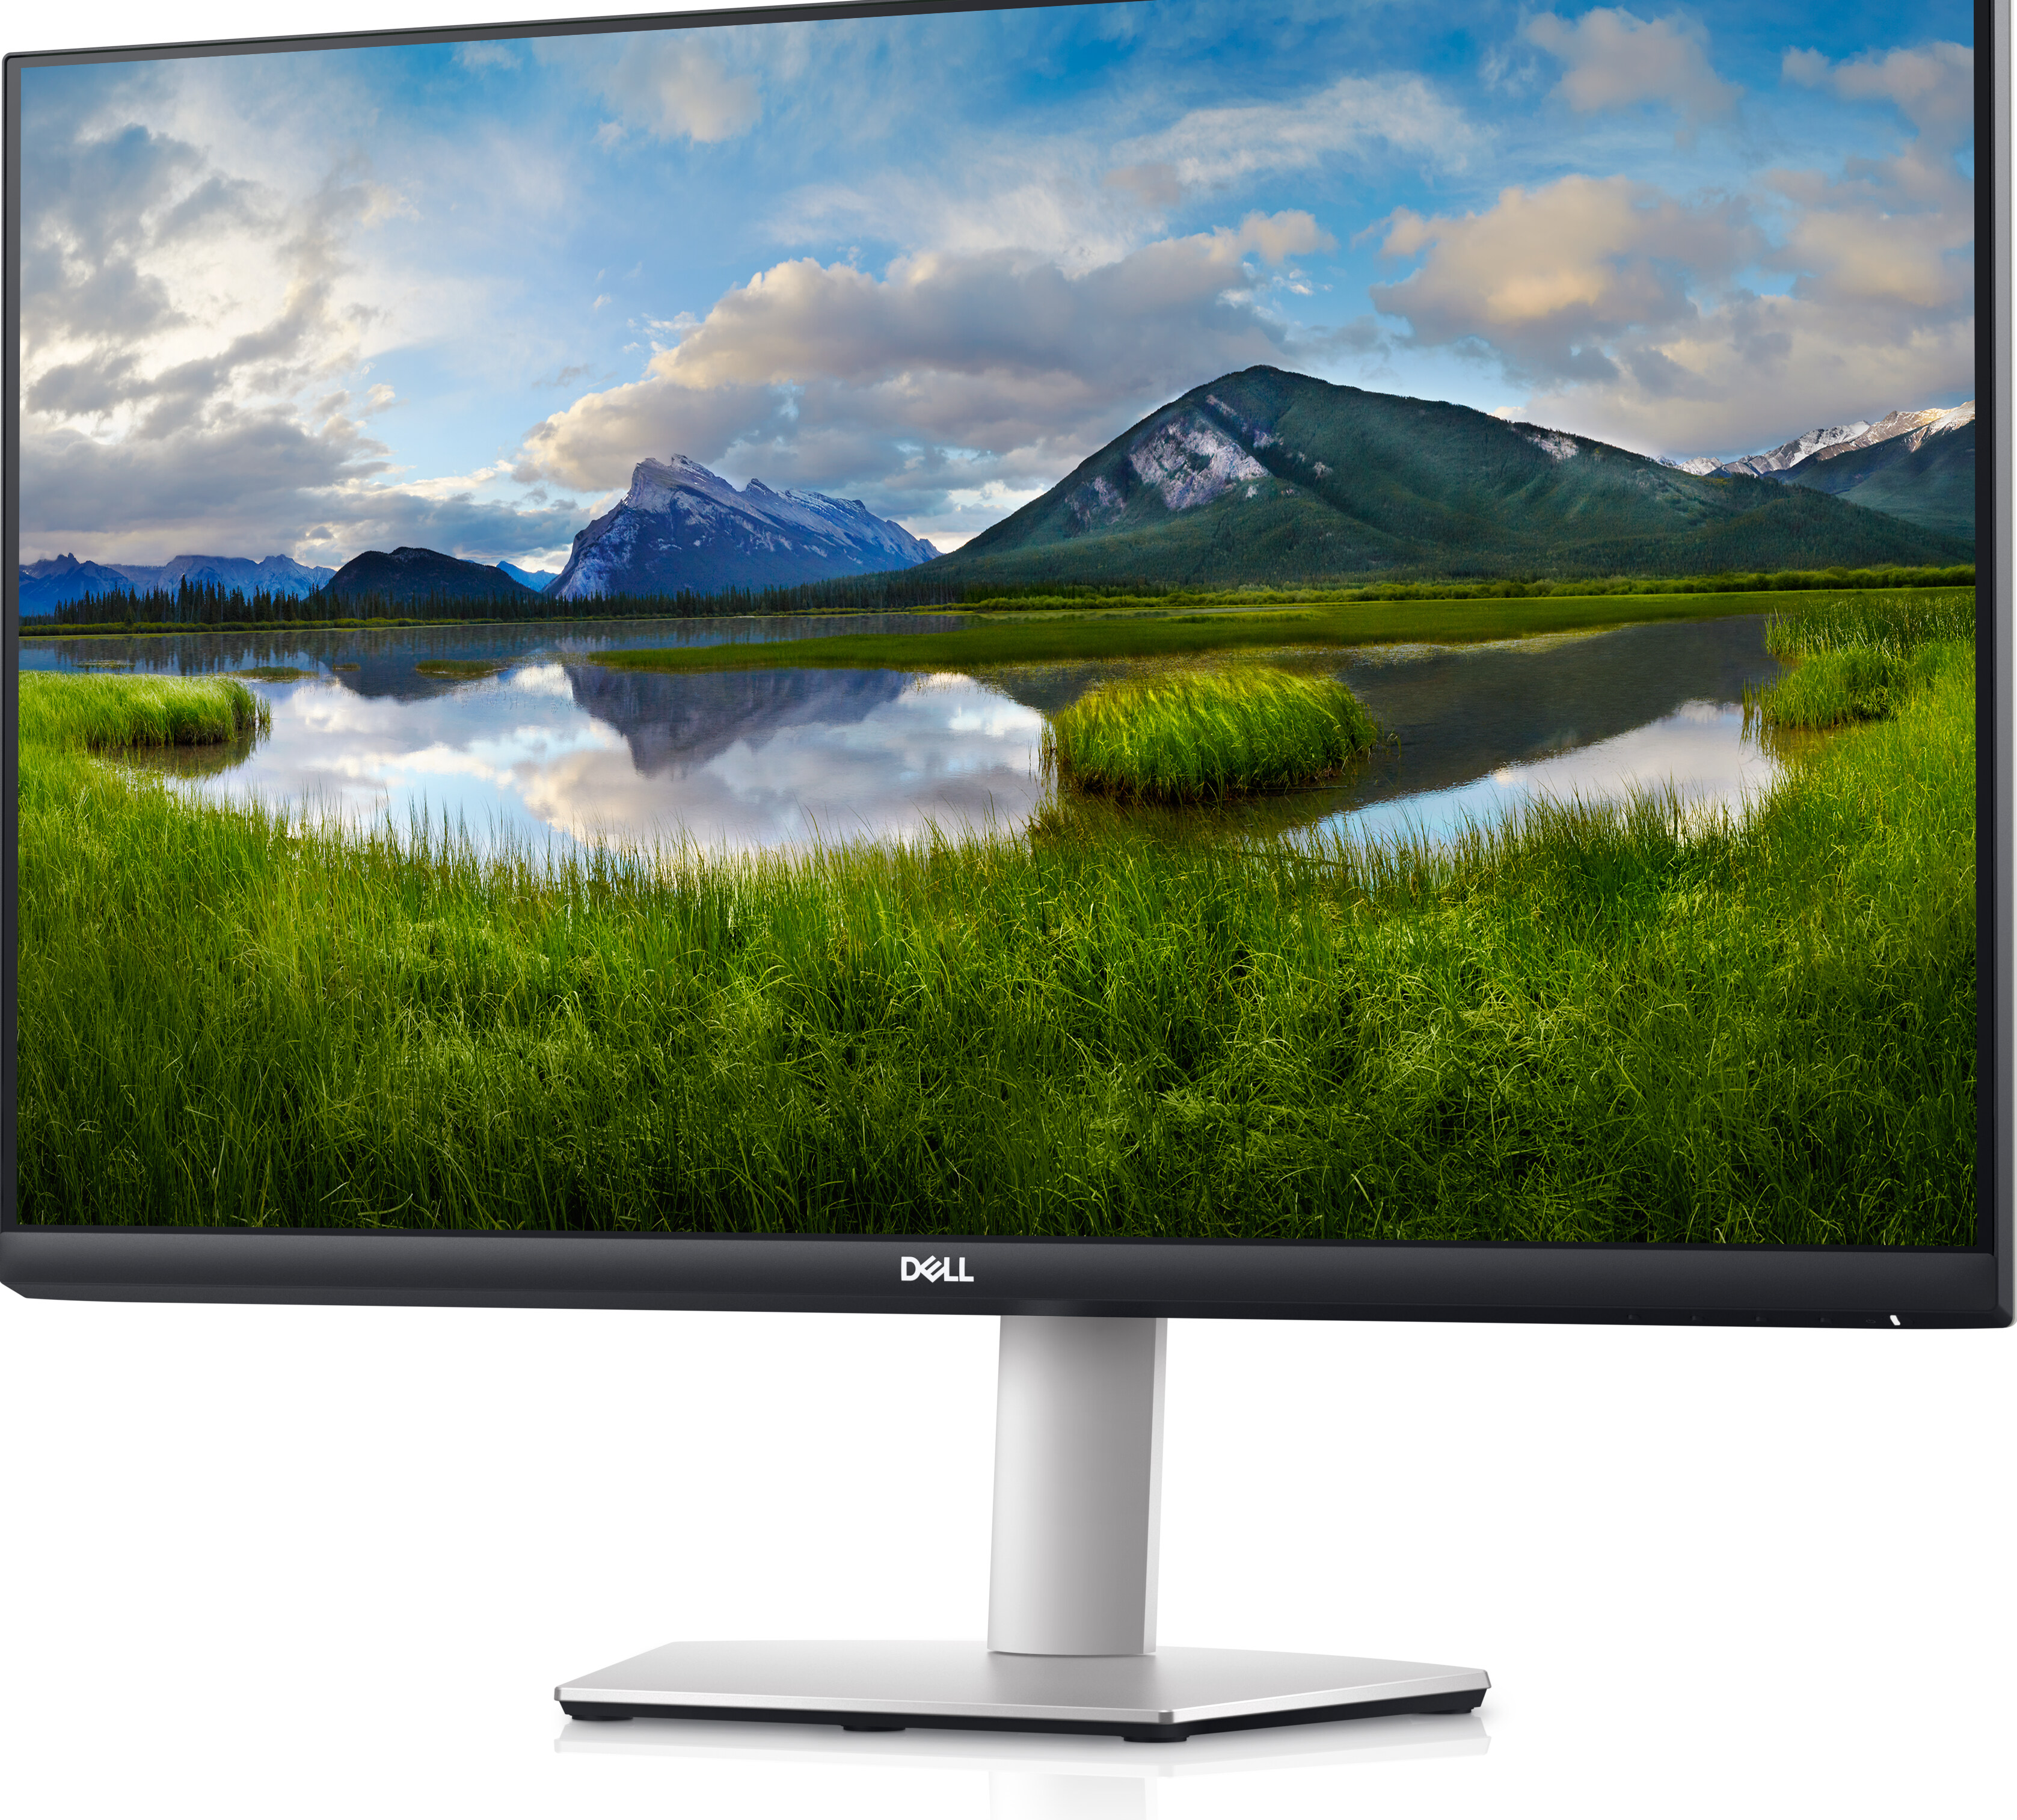 Buy Dell S Series 68.58 cm (27 inch) Full HD IPS Panel LCD Ultra Slim Bezel  Monitor with AMD FreeSync Premium Technology Online - Croma